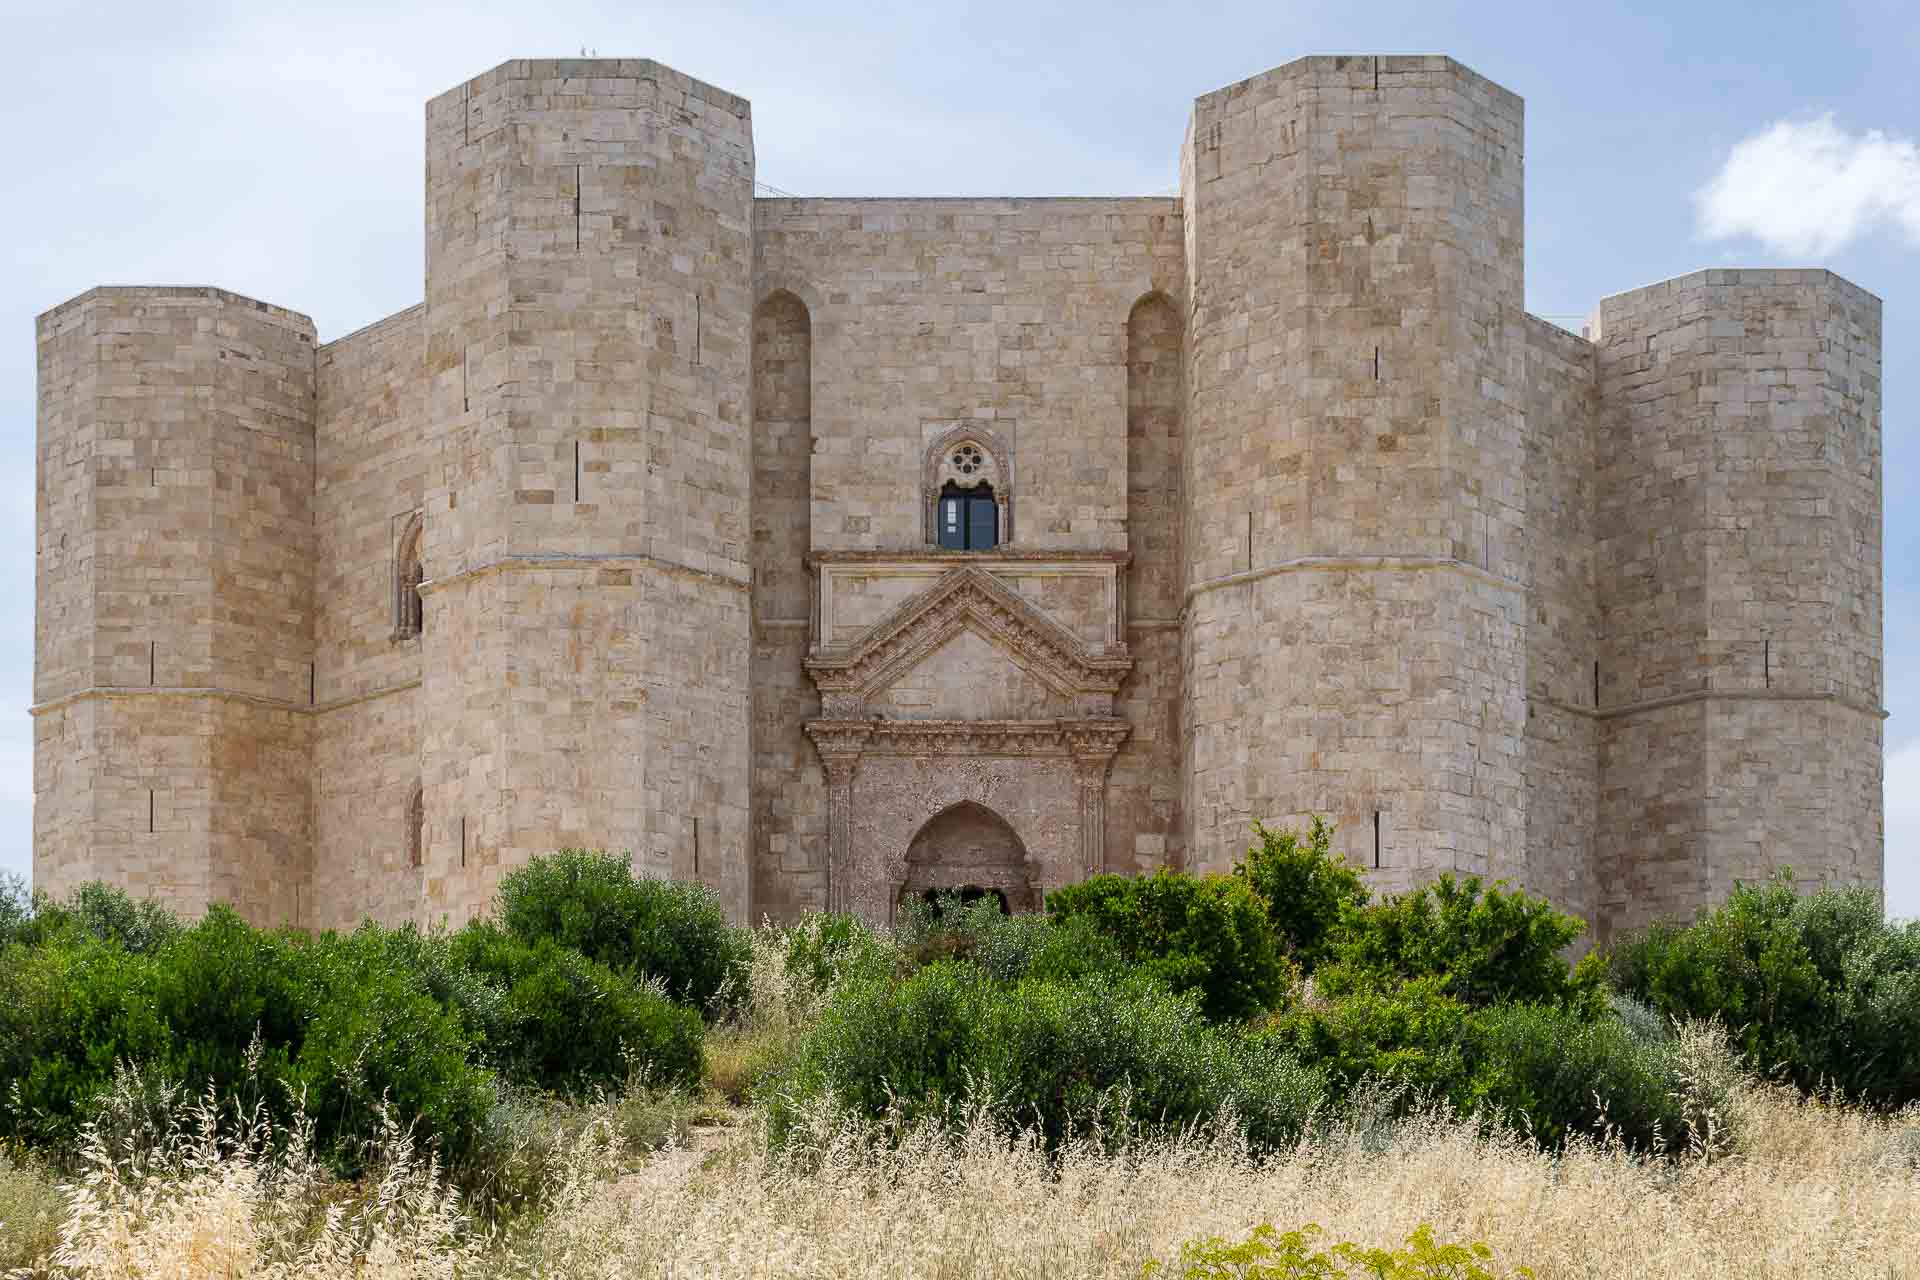 The Castel Del Monte with octagon towers, one of the activities to have in your Puglia itinerary